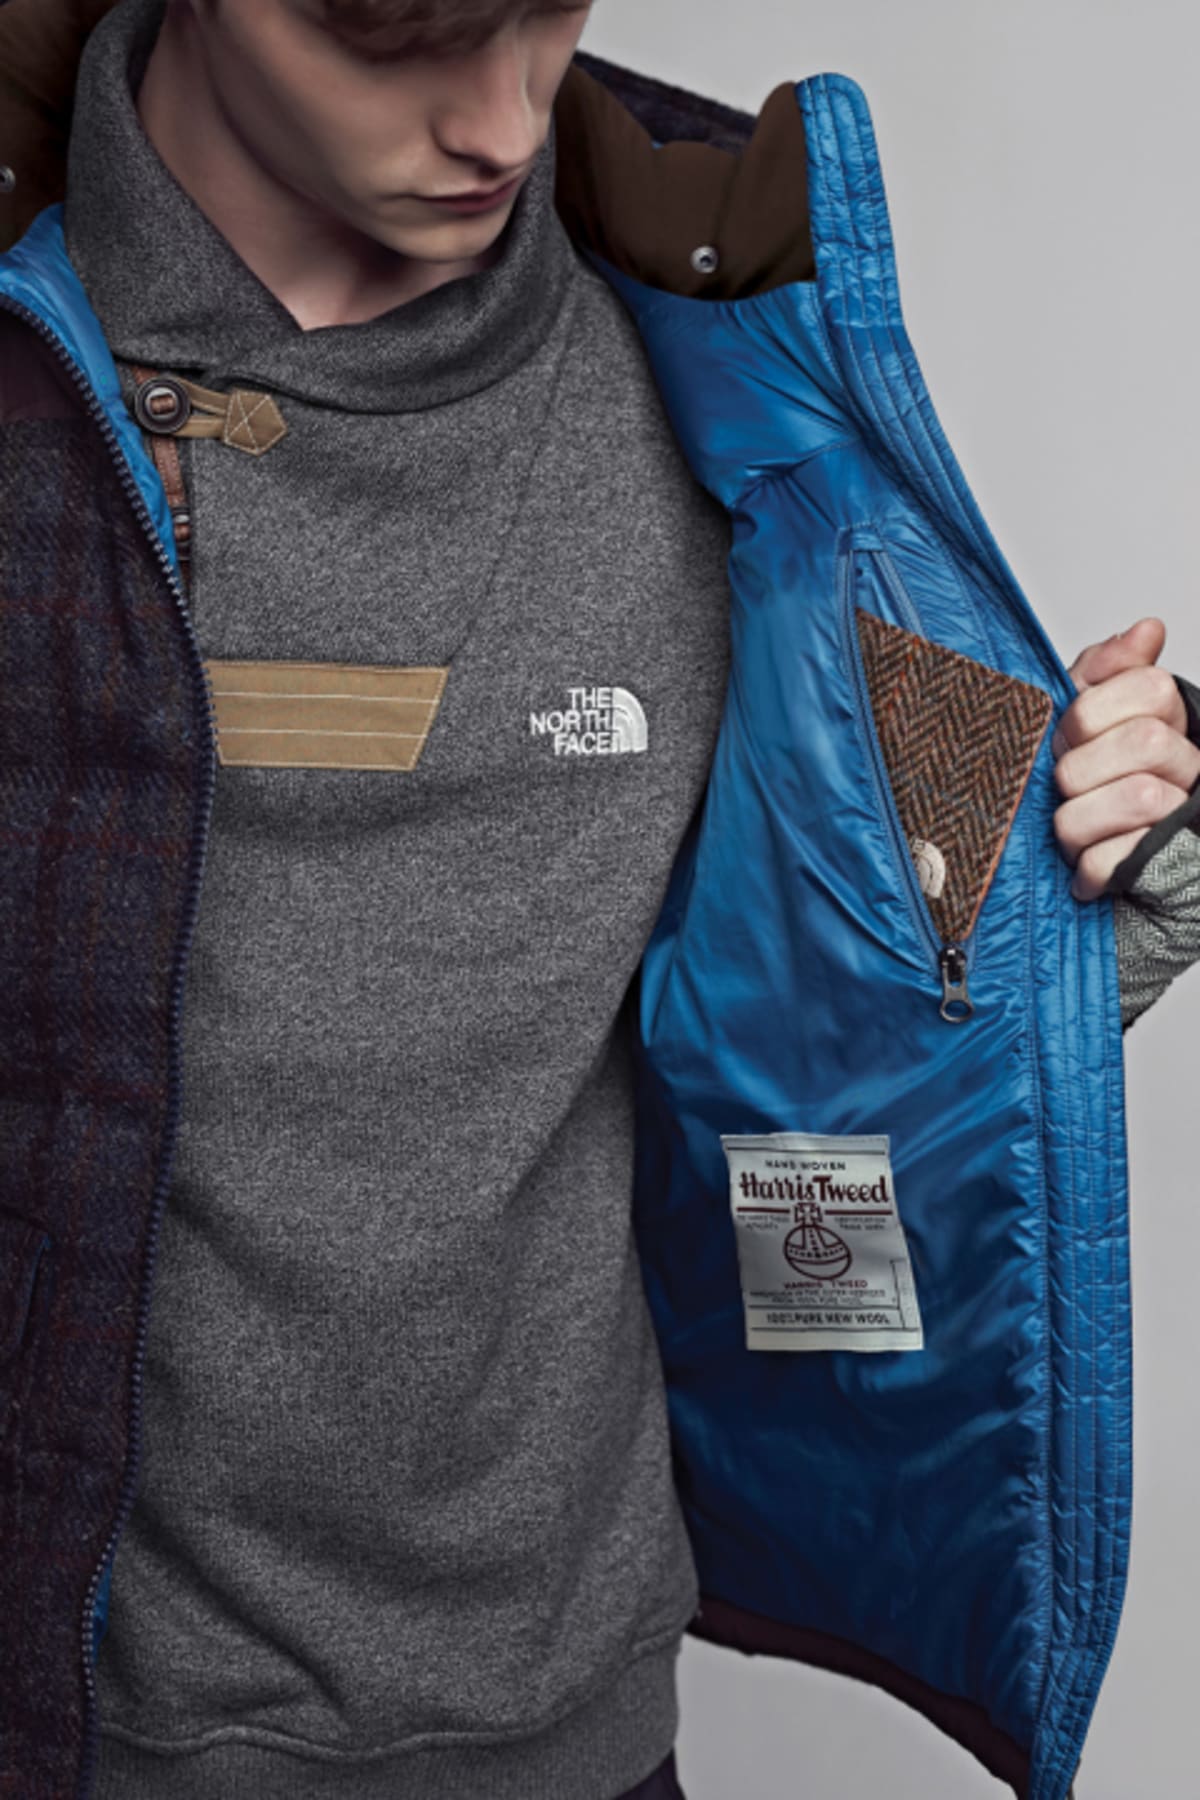 The North Face Debuts White Label, A New Line Exclusively for South ...